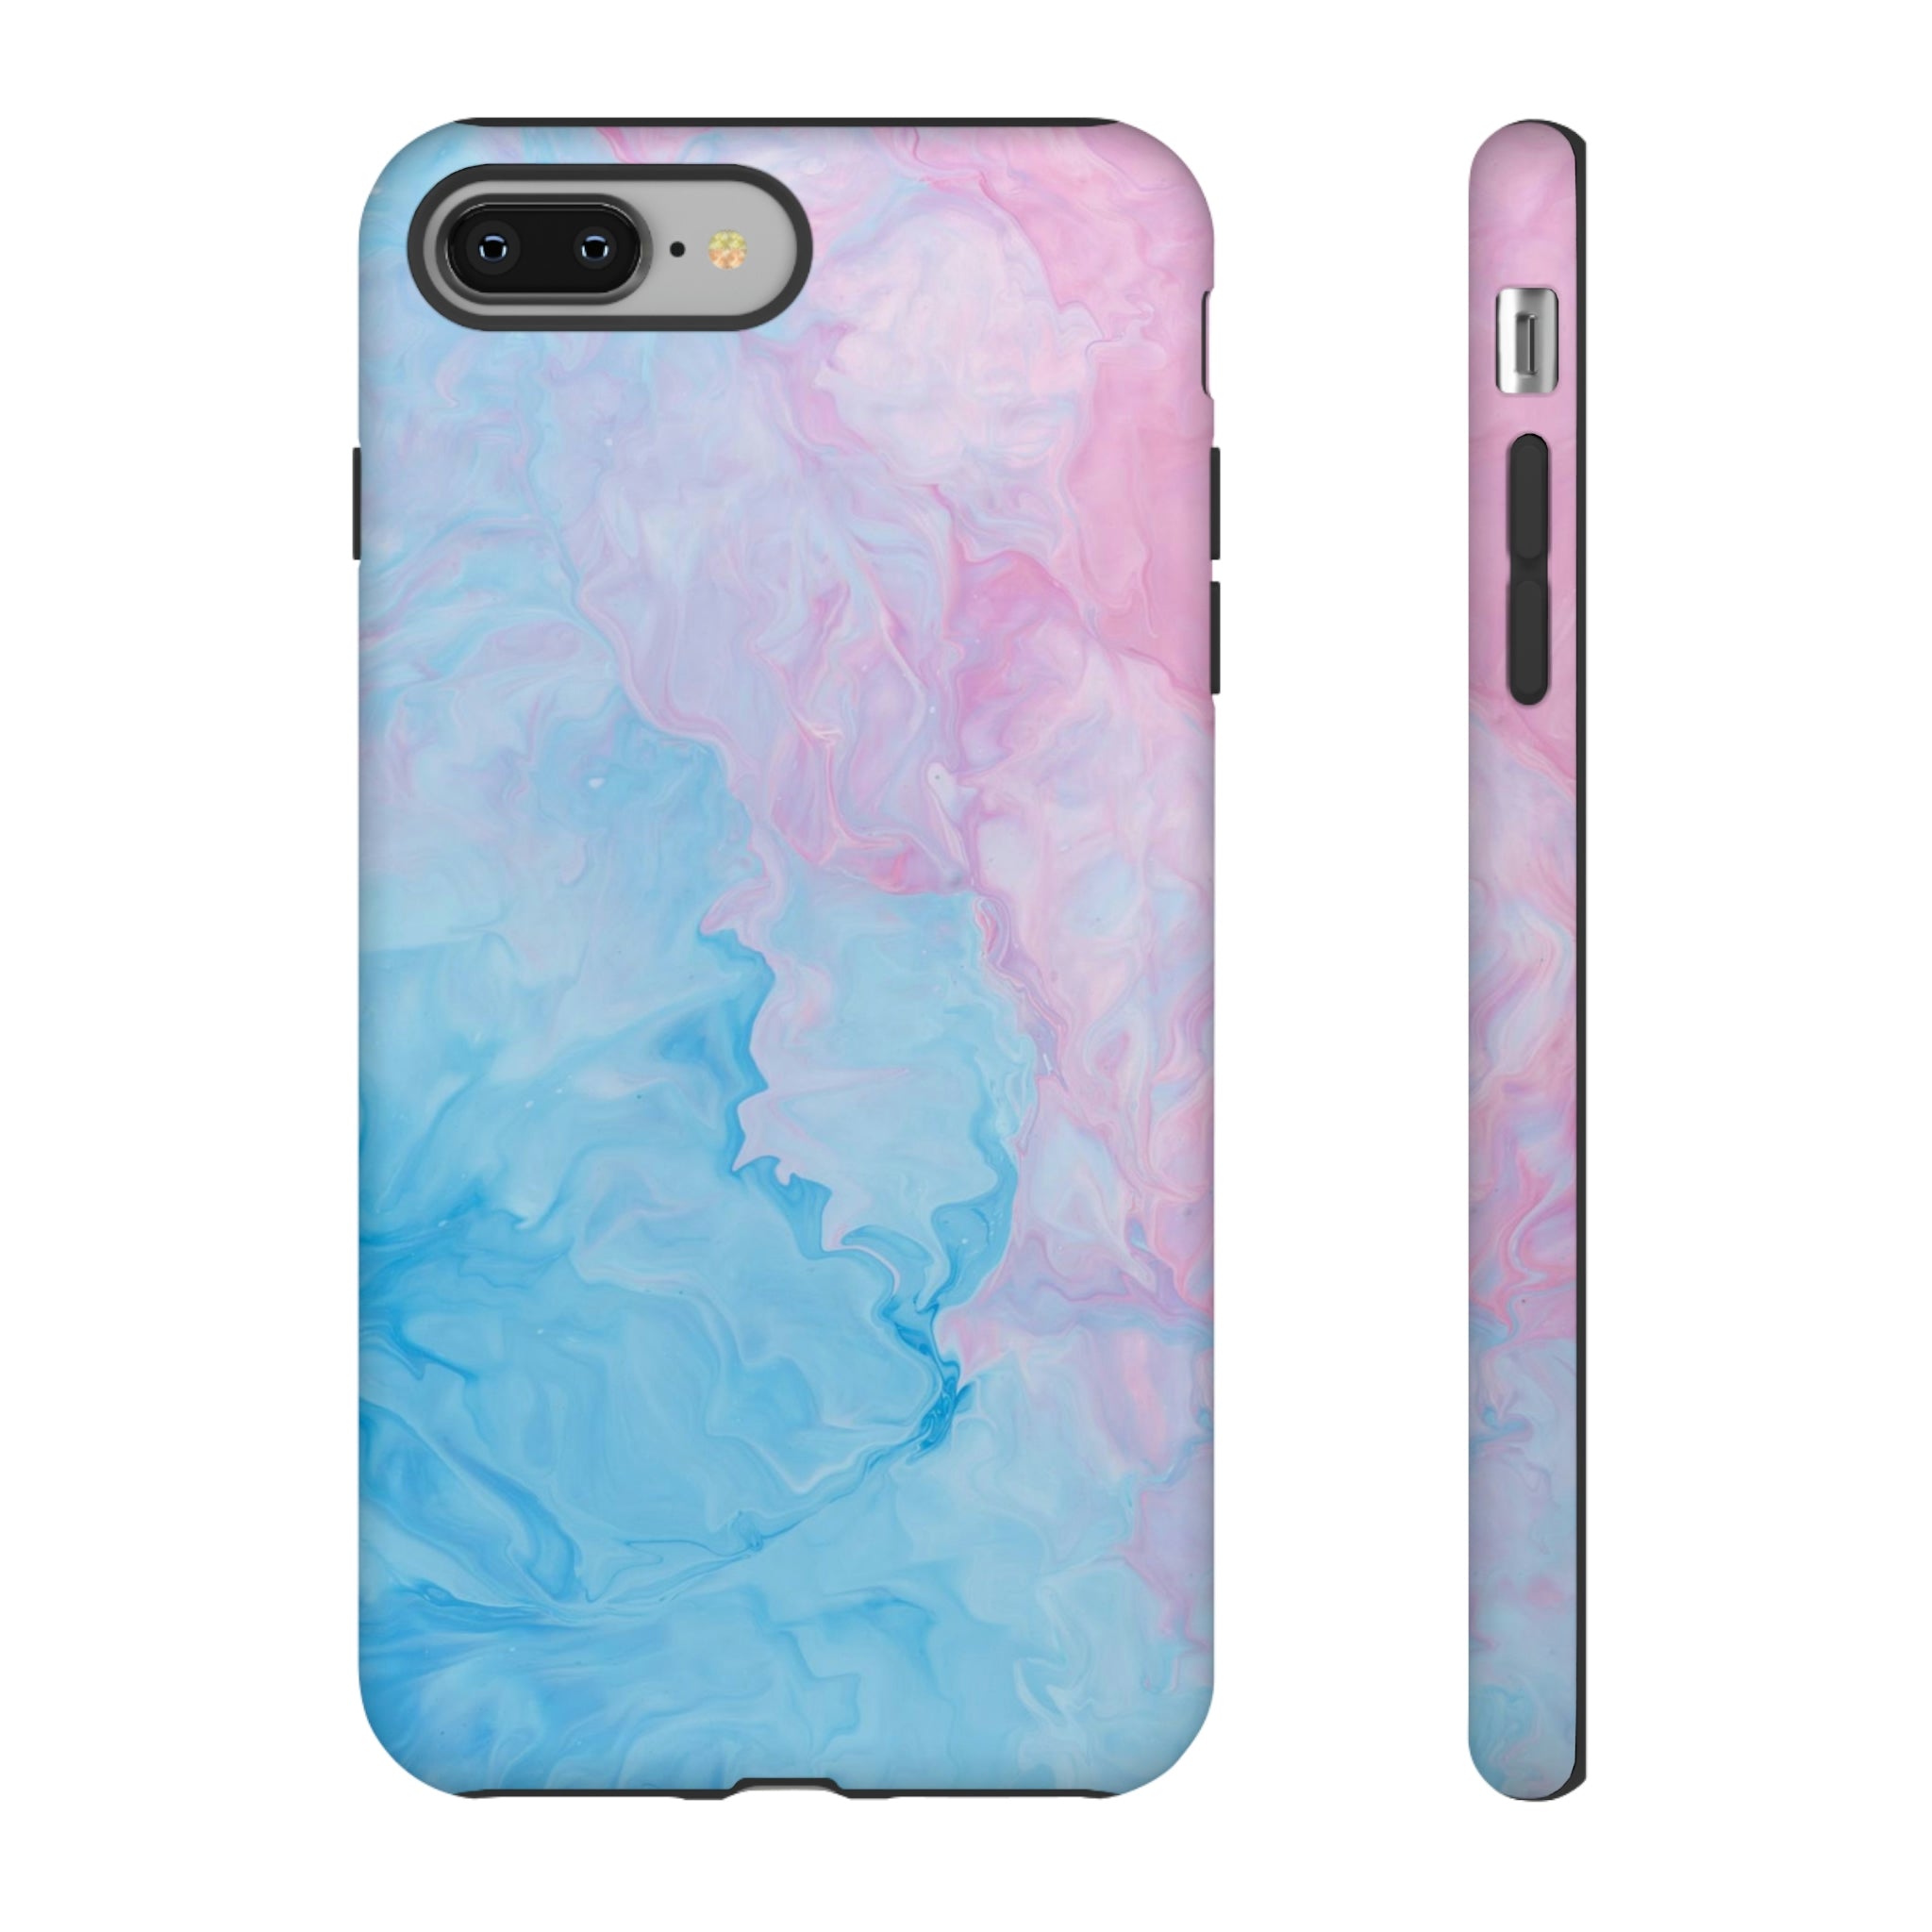 Cotton Candy - Dual Layered, Full Body, Armored Phone Case for iPhone 13/Samsung Galaxy S22/Google Pixel 6Smartphone CasesStreamLiteStreamLite